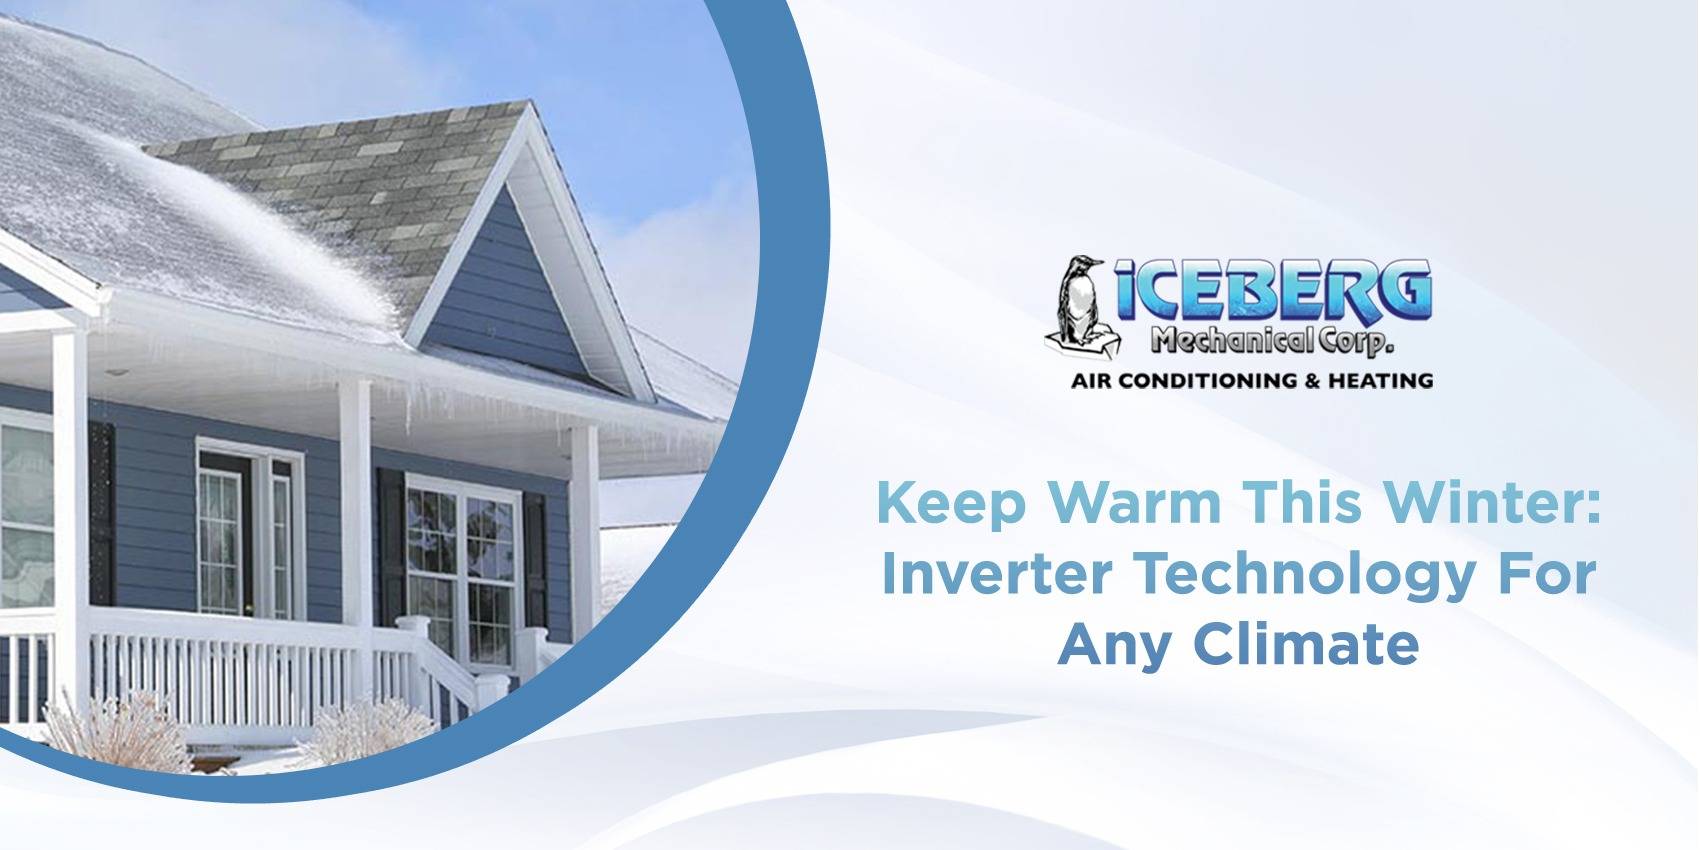 Keep Warm This Winter Inverter Technology For Any Climate_IceBerg